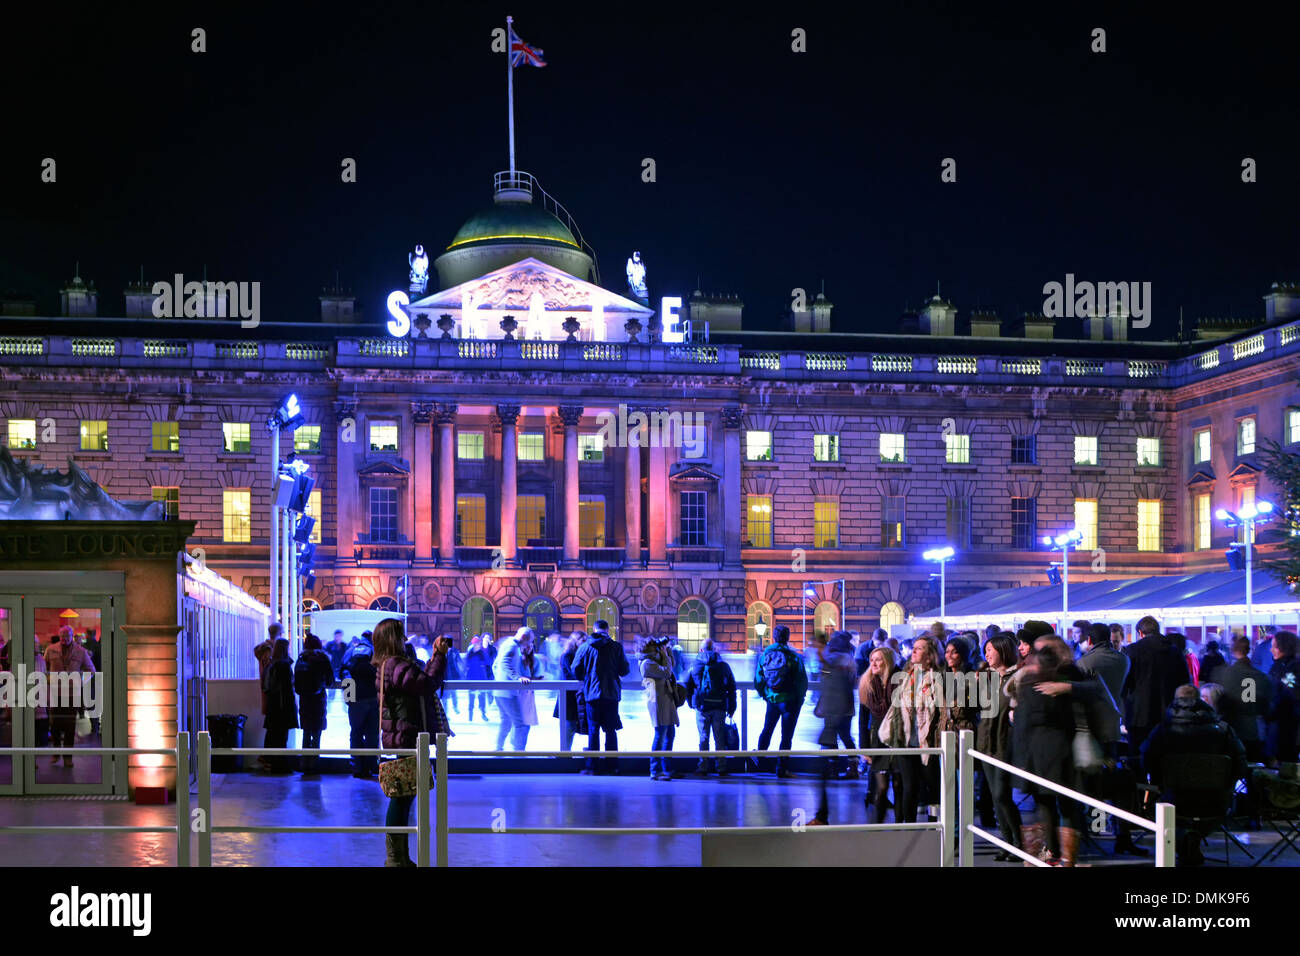 People watch ice skaters Somerset House night floodlit facade of historical building around temporary winter ice skating rink in courtyard London UK Stock Photo